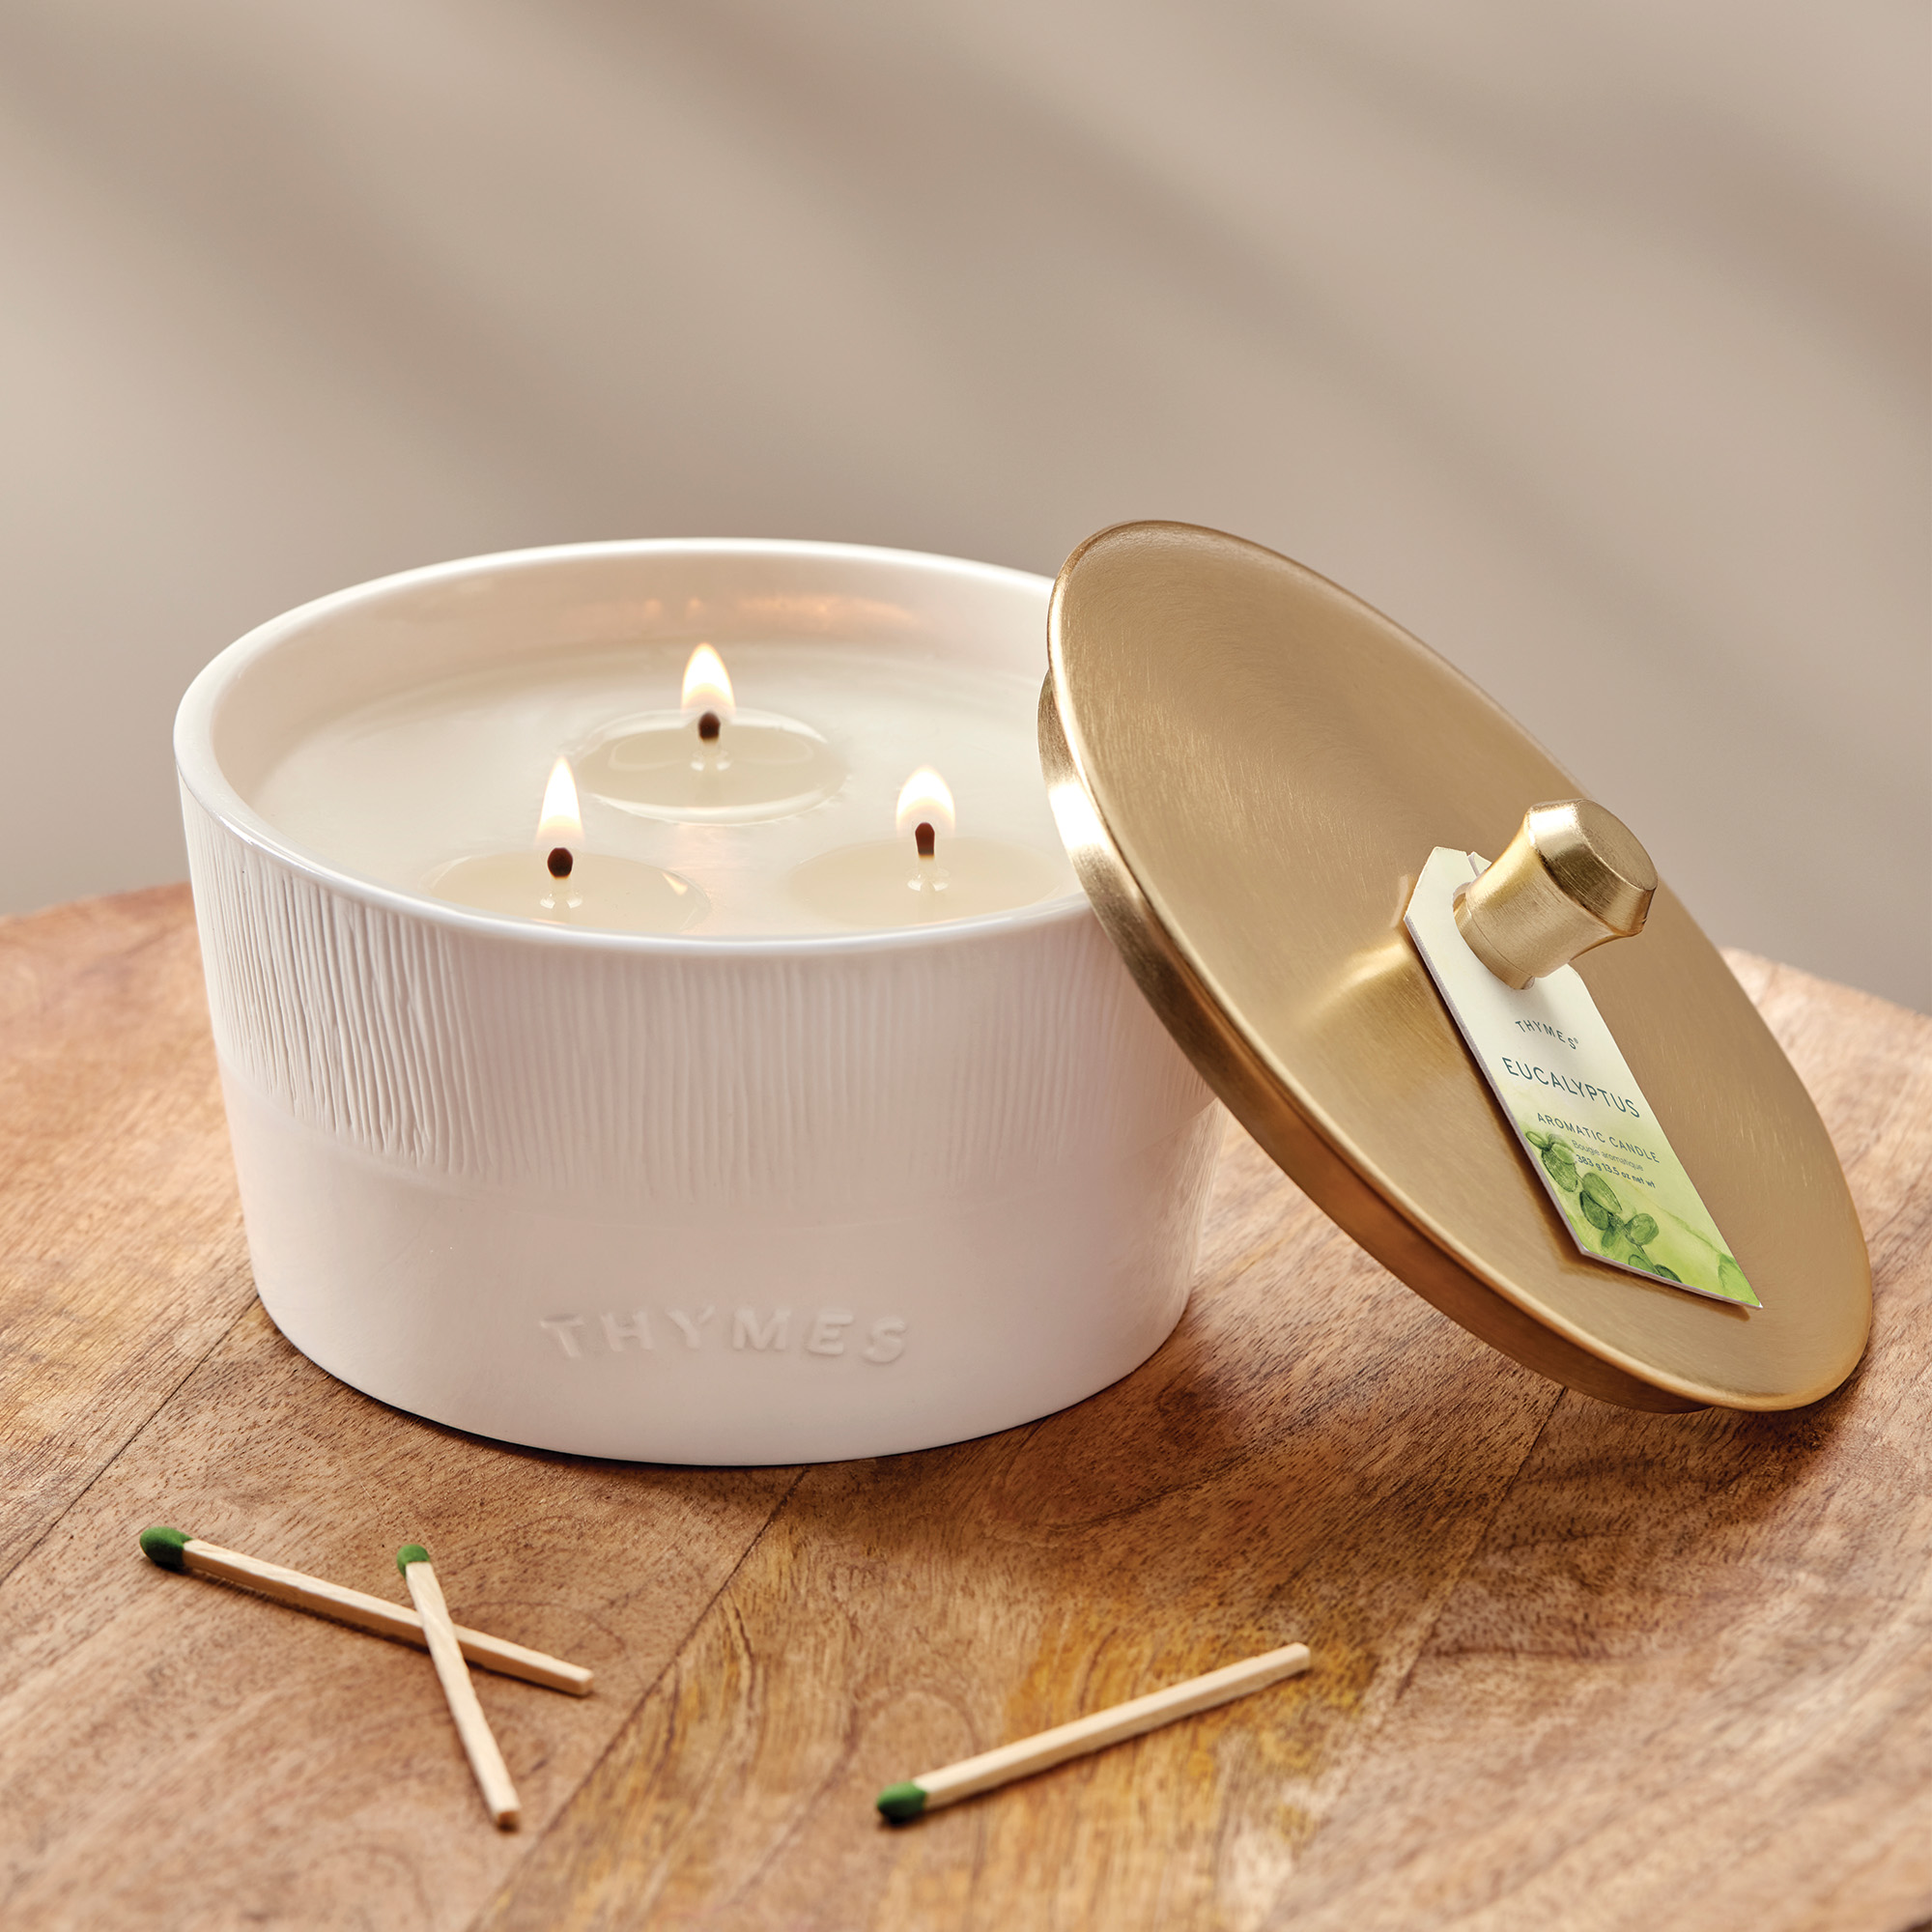 Firefly Candle Co. Botany 3 Wick Candles